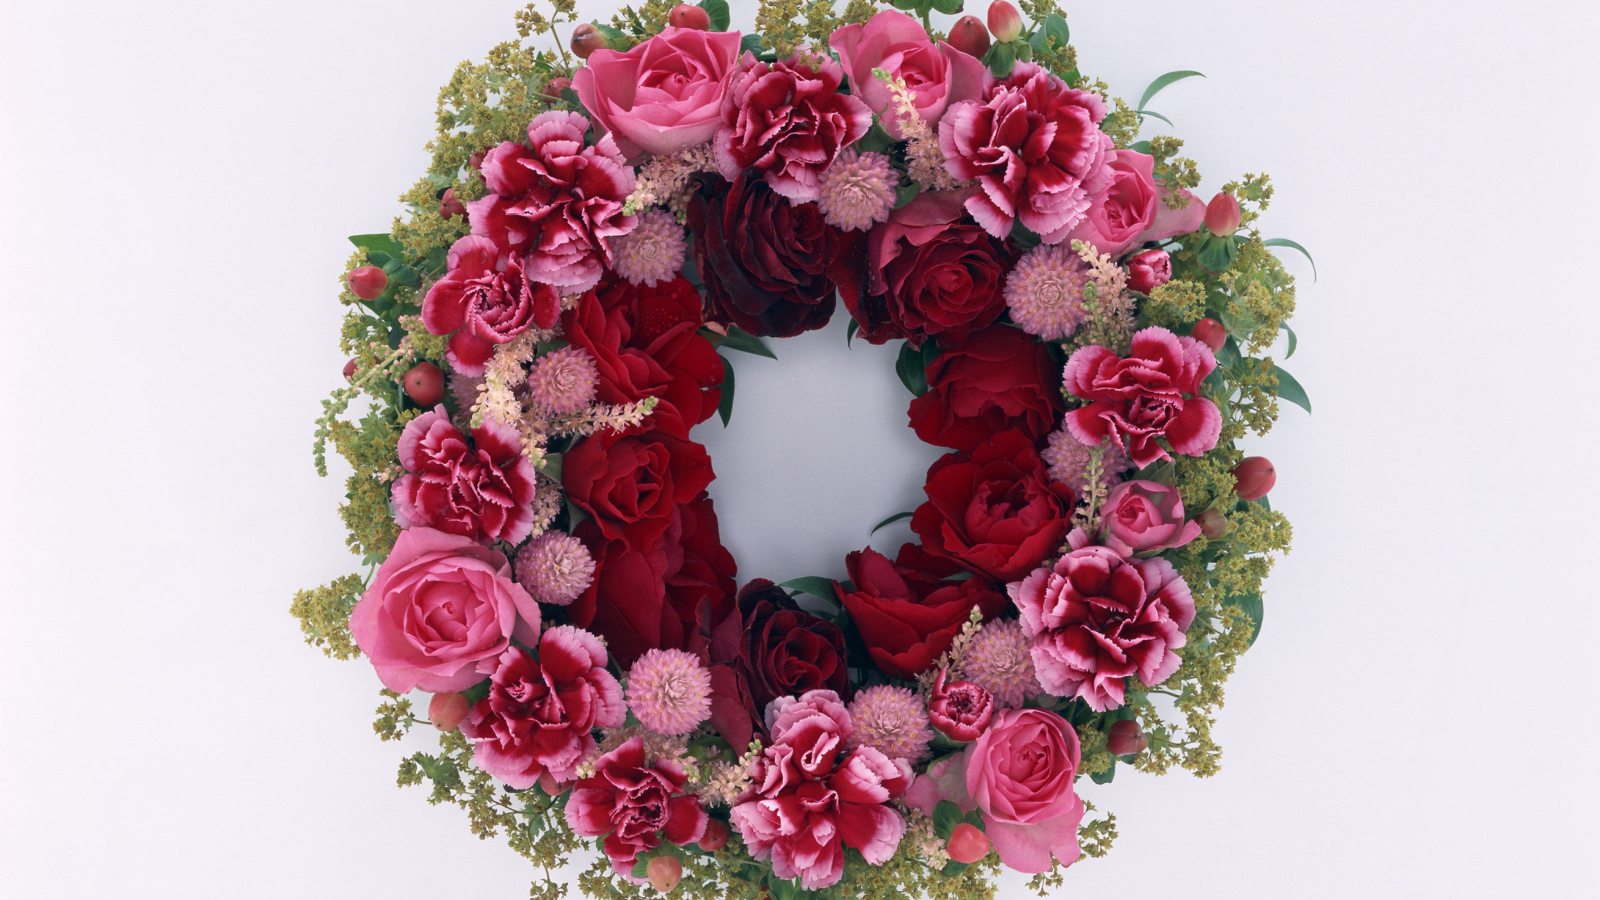 Wreath and red roses with carnation flowers on a gray background